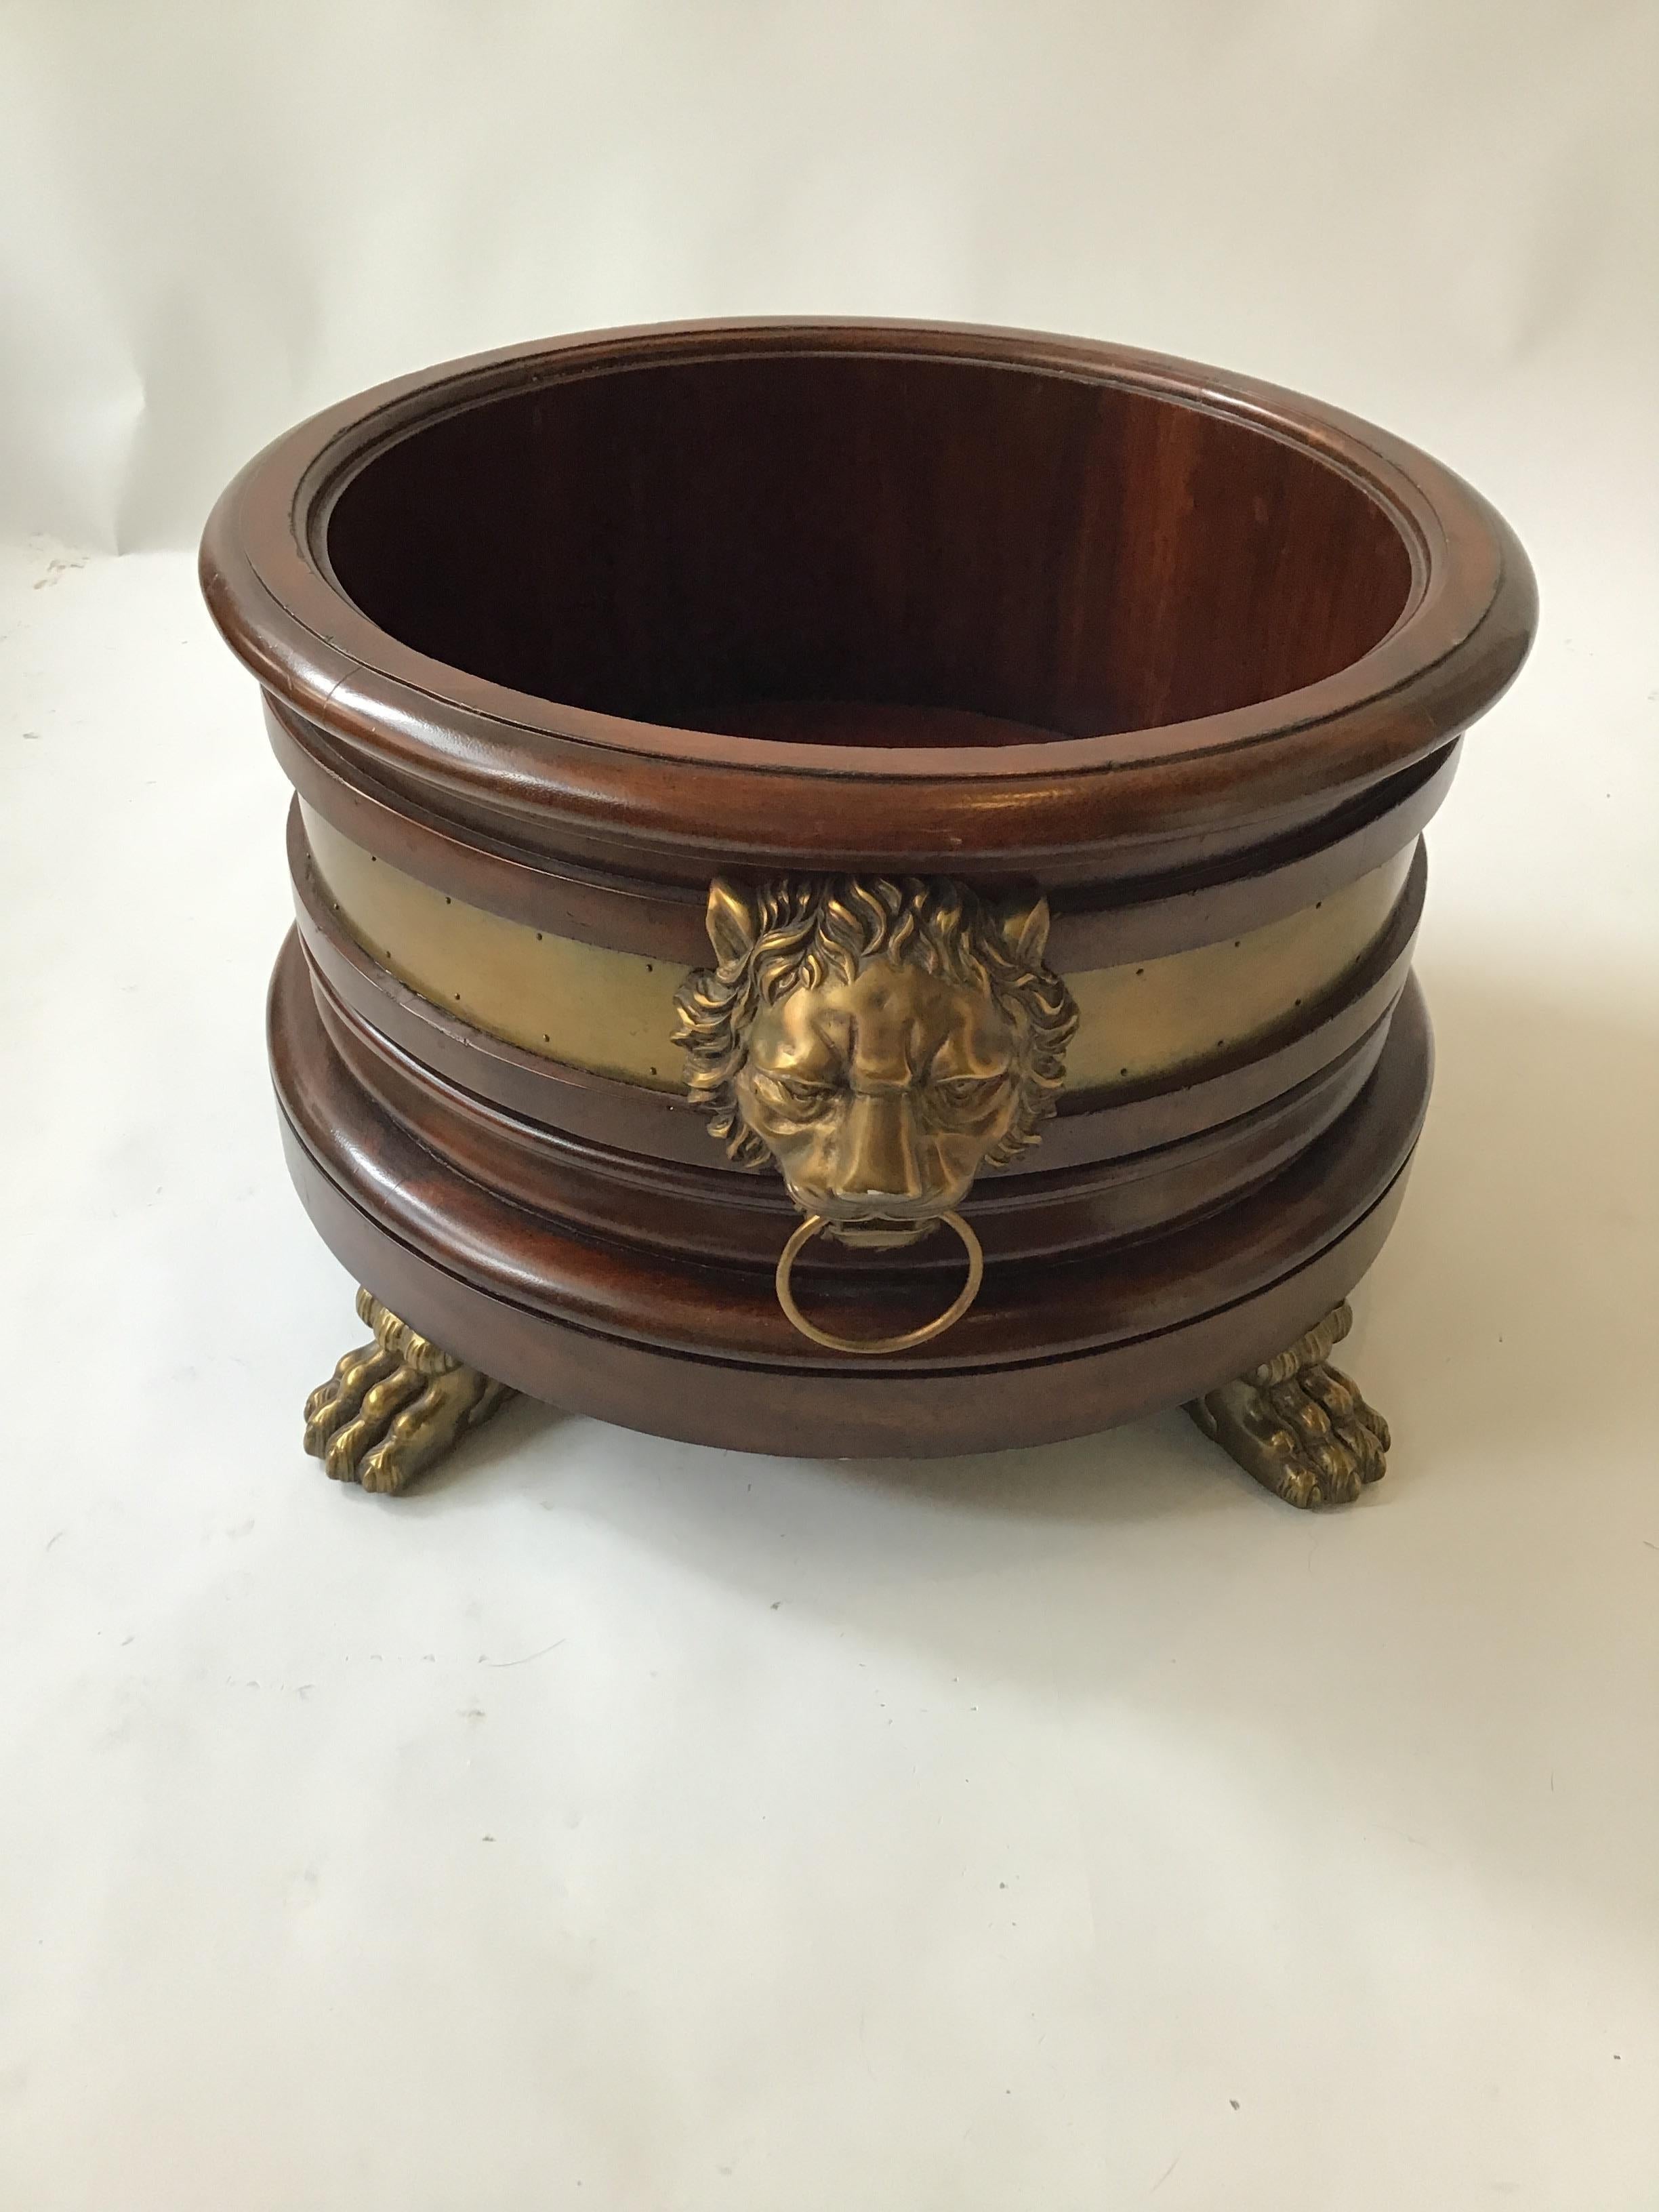 Ralph Lauren Wood and brass lion head planter. From a celebrities Southampton, NY oceanfront estate.